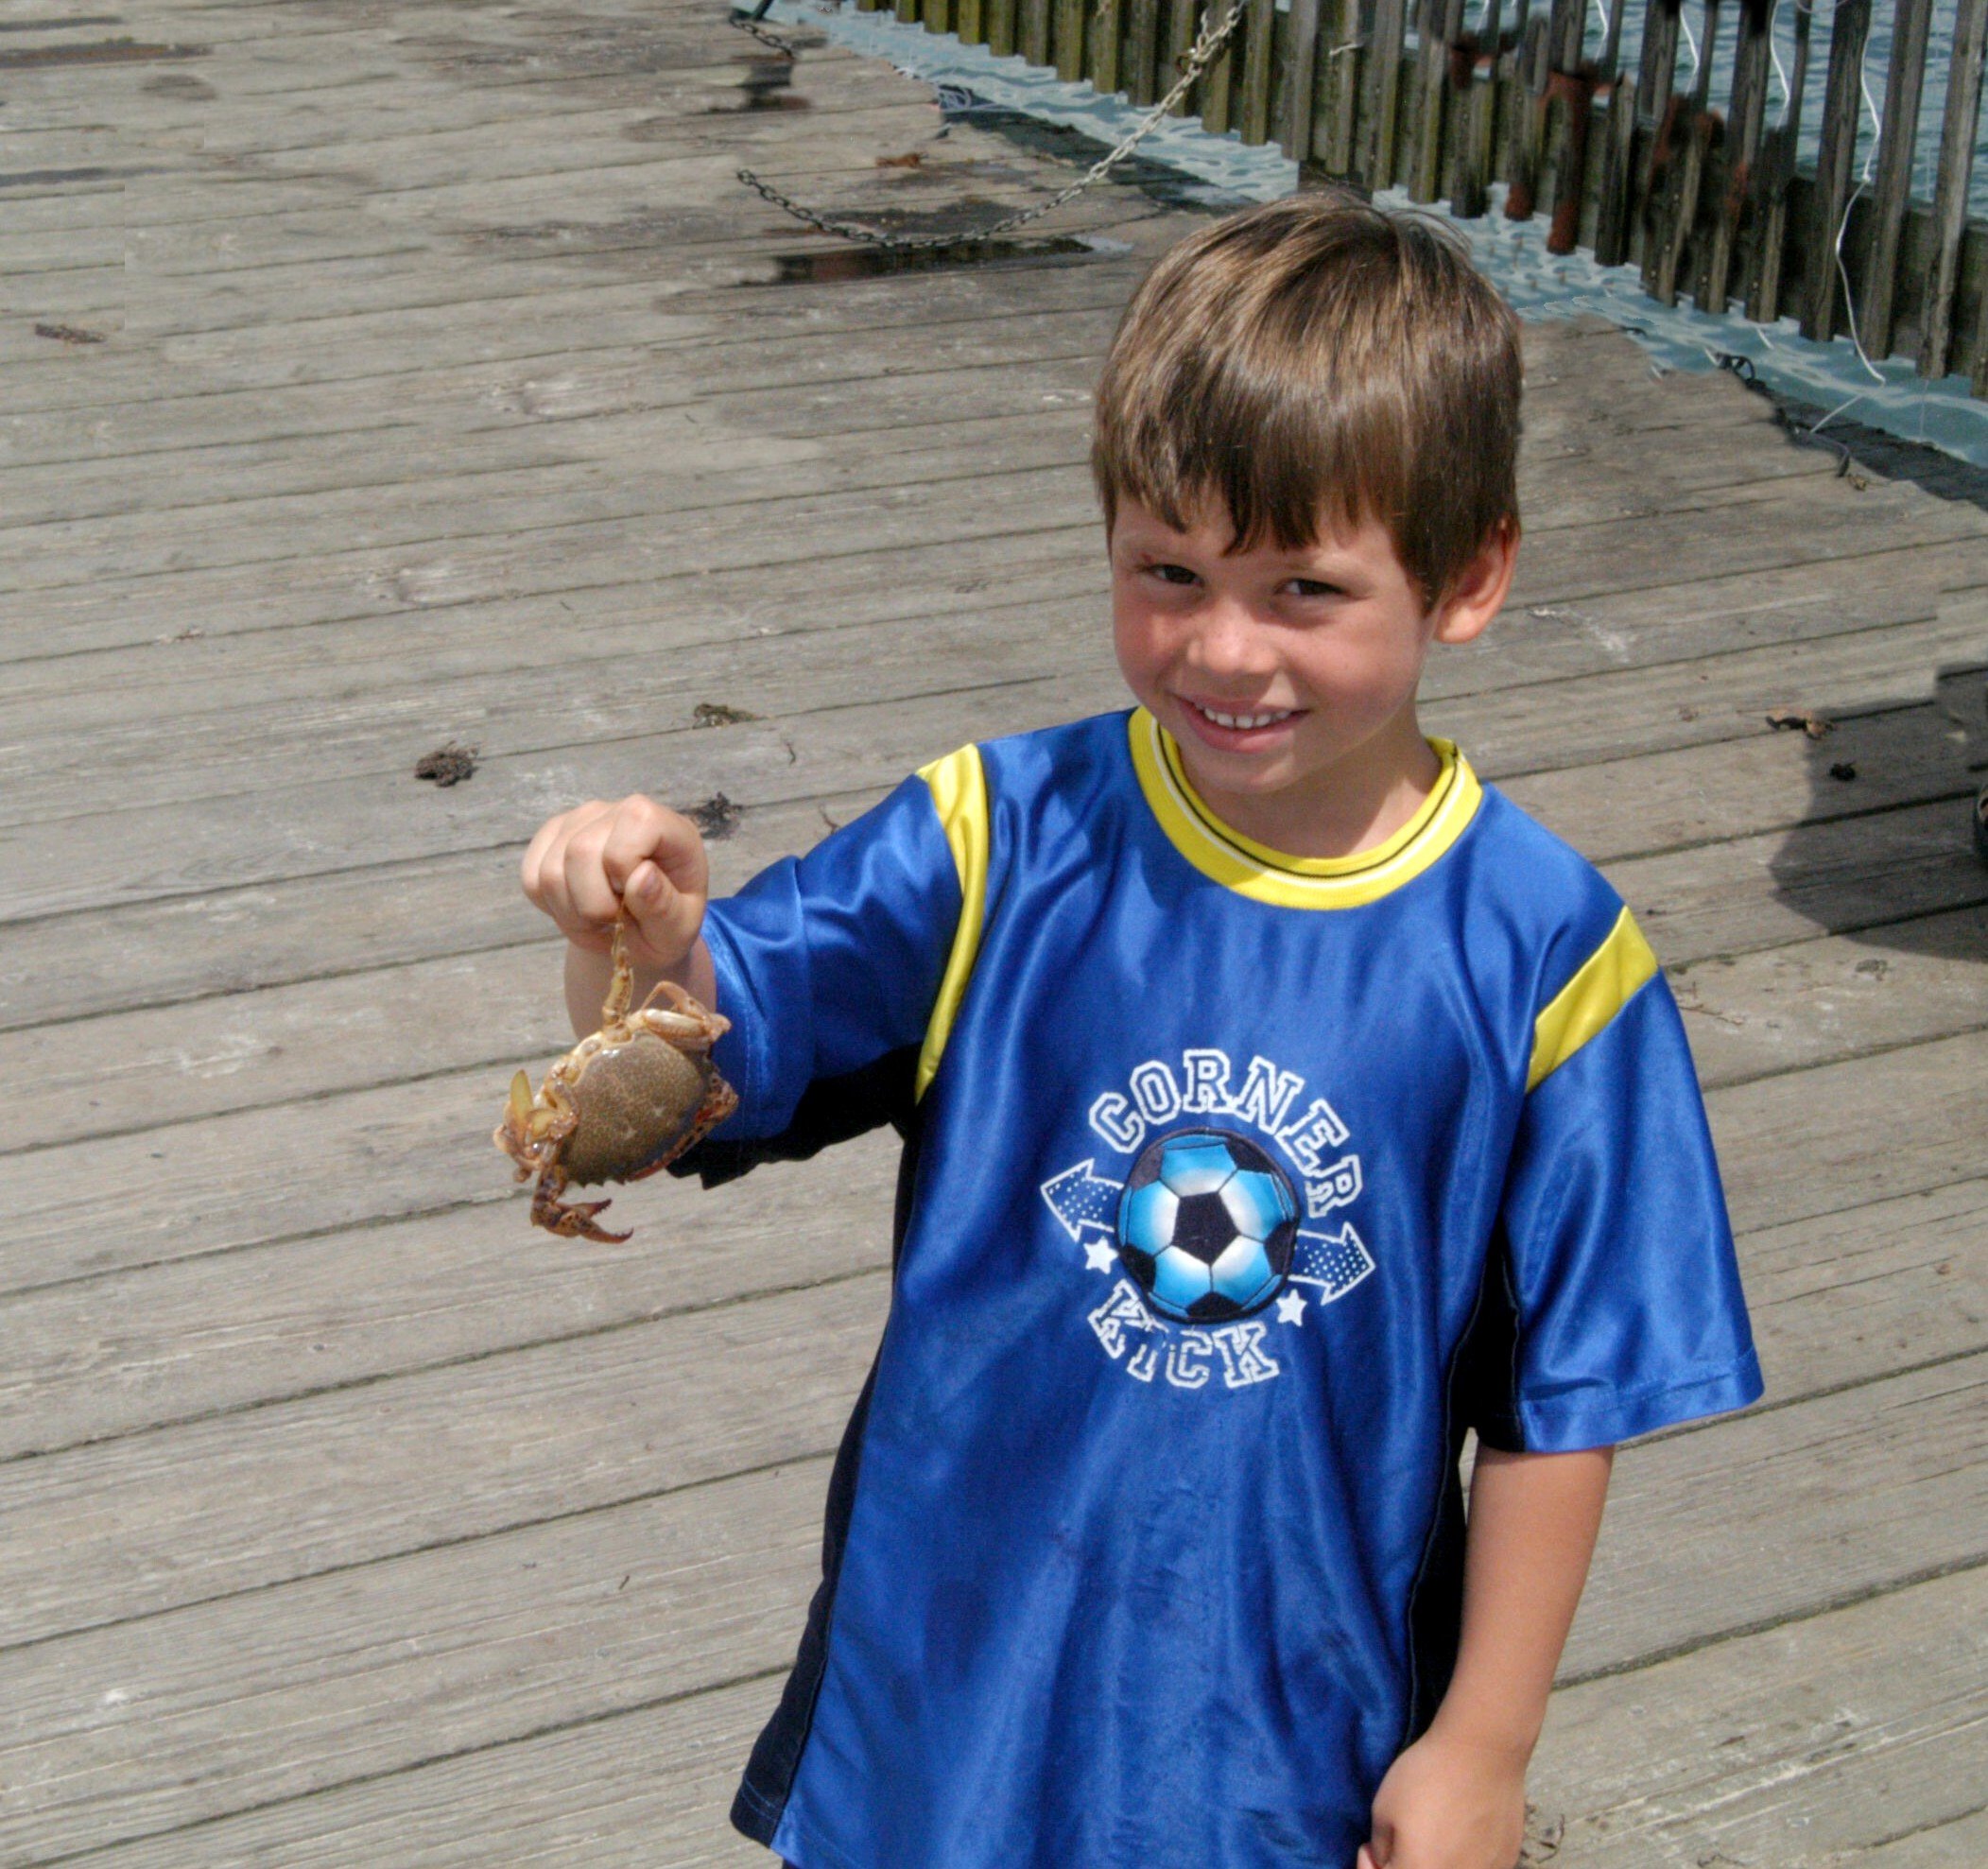 bass river crab and boy who caught it.jpg